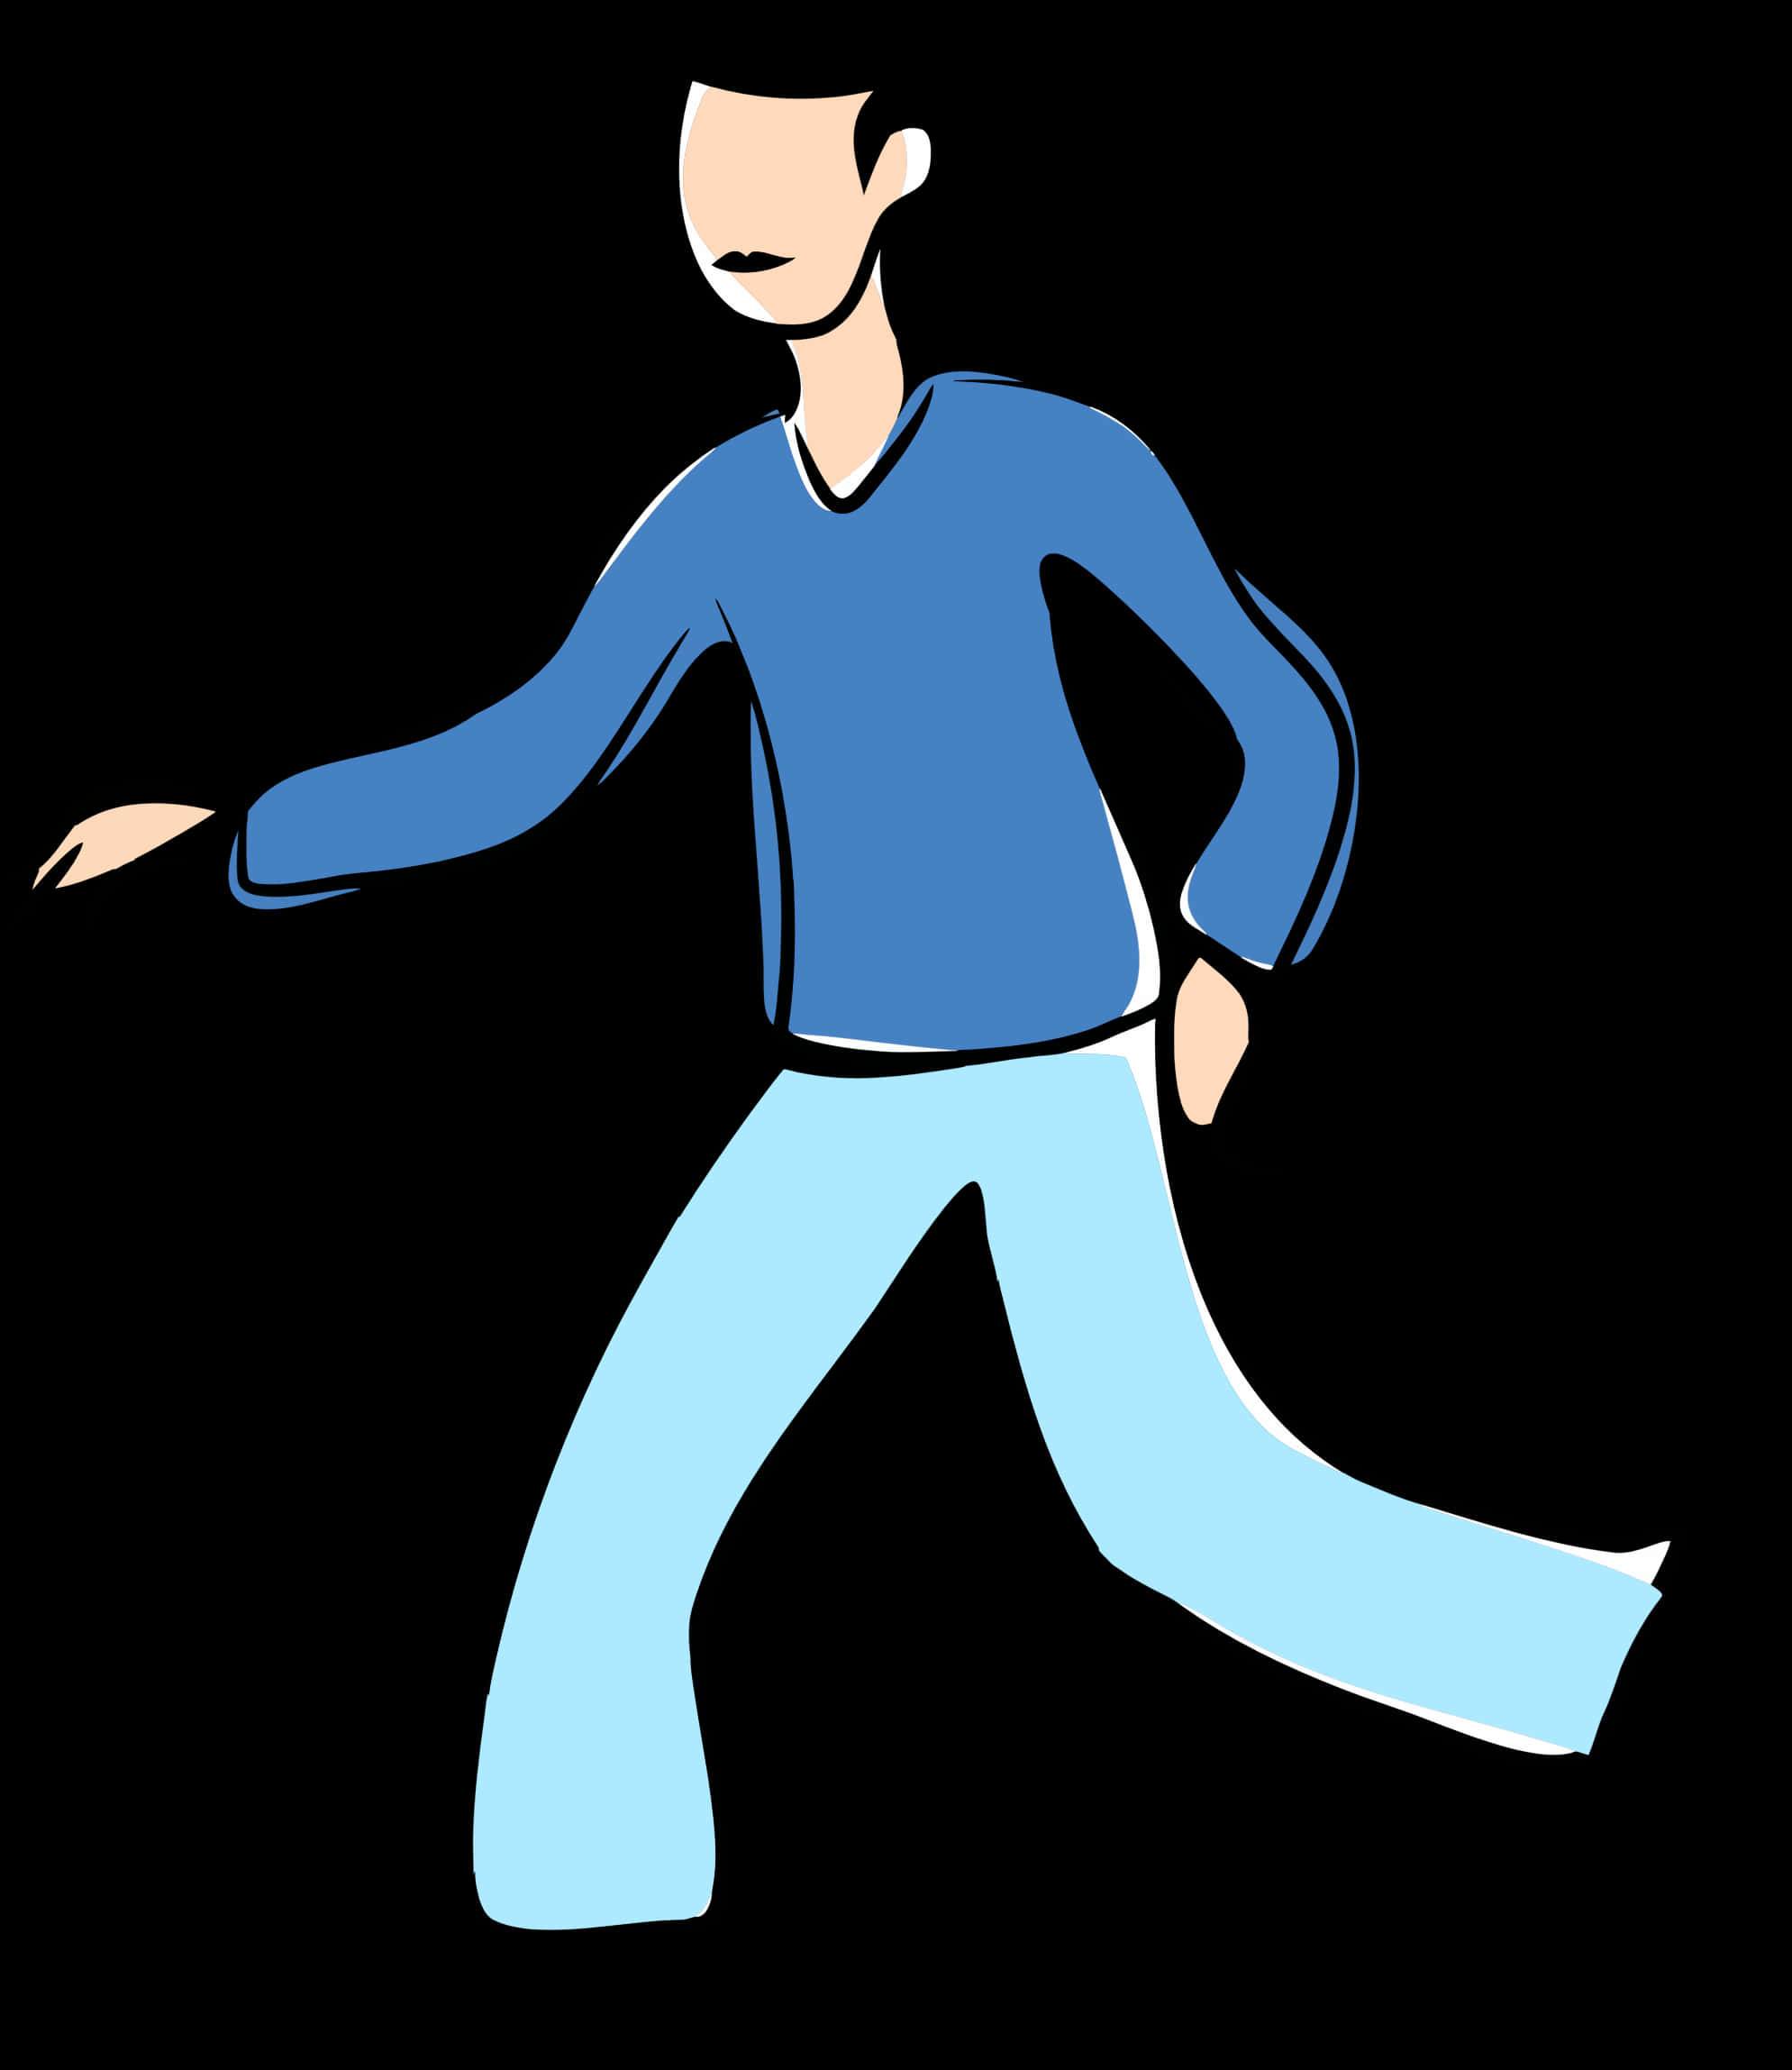 Stylized Man Walking Vector PNG image